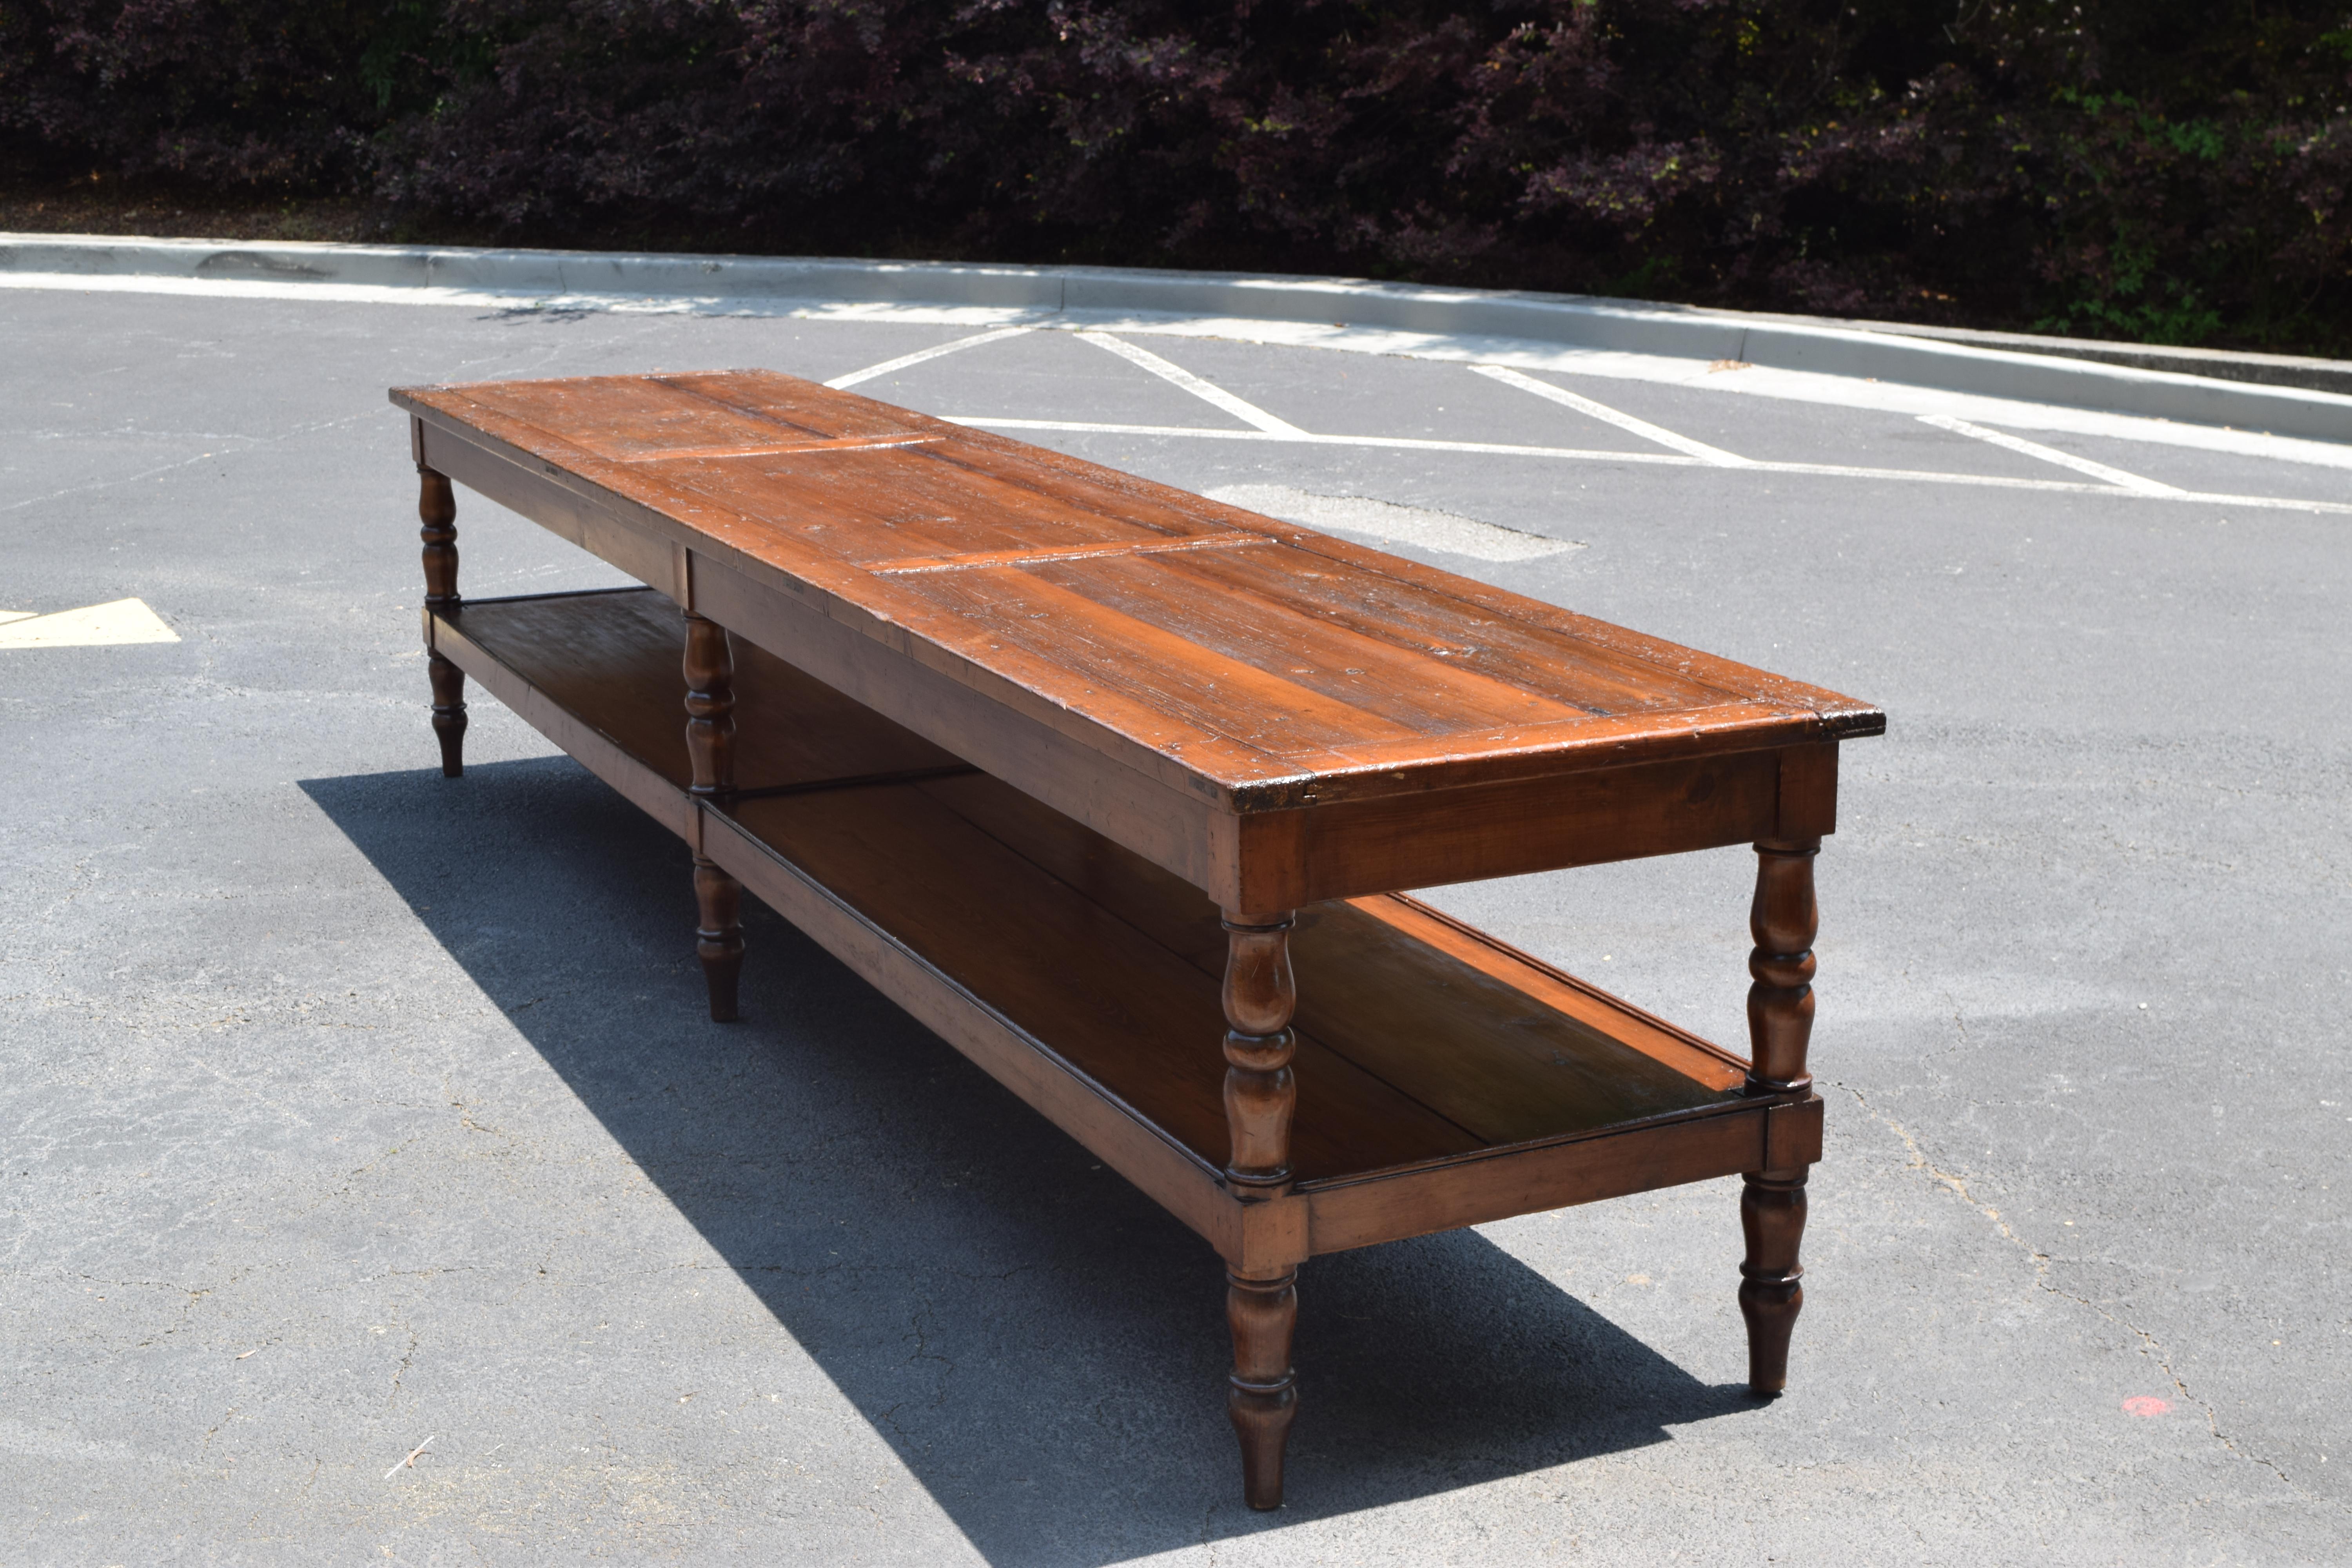 Hand-Carved Italian Late Neoclassic Period Pinewood Two Tier Draper's Table, mid 19th cen.